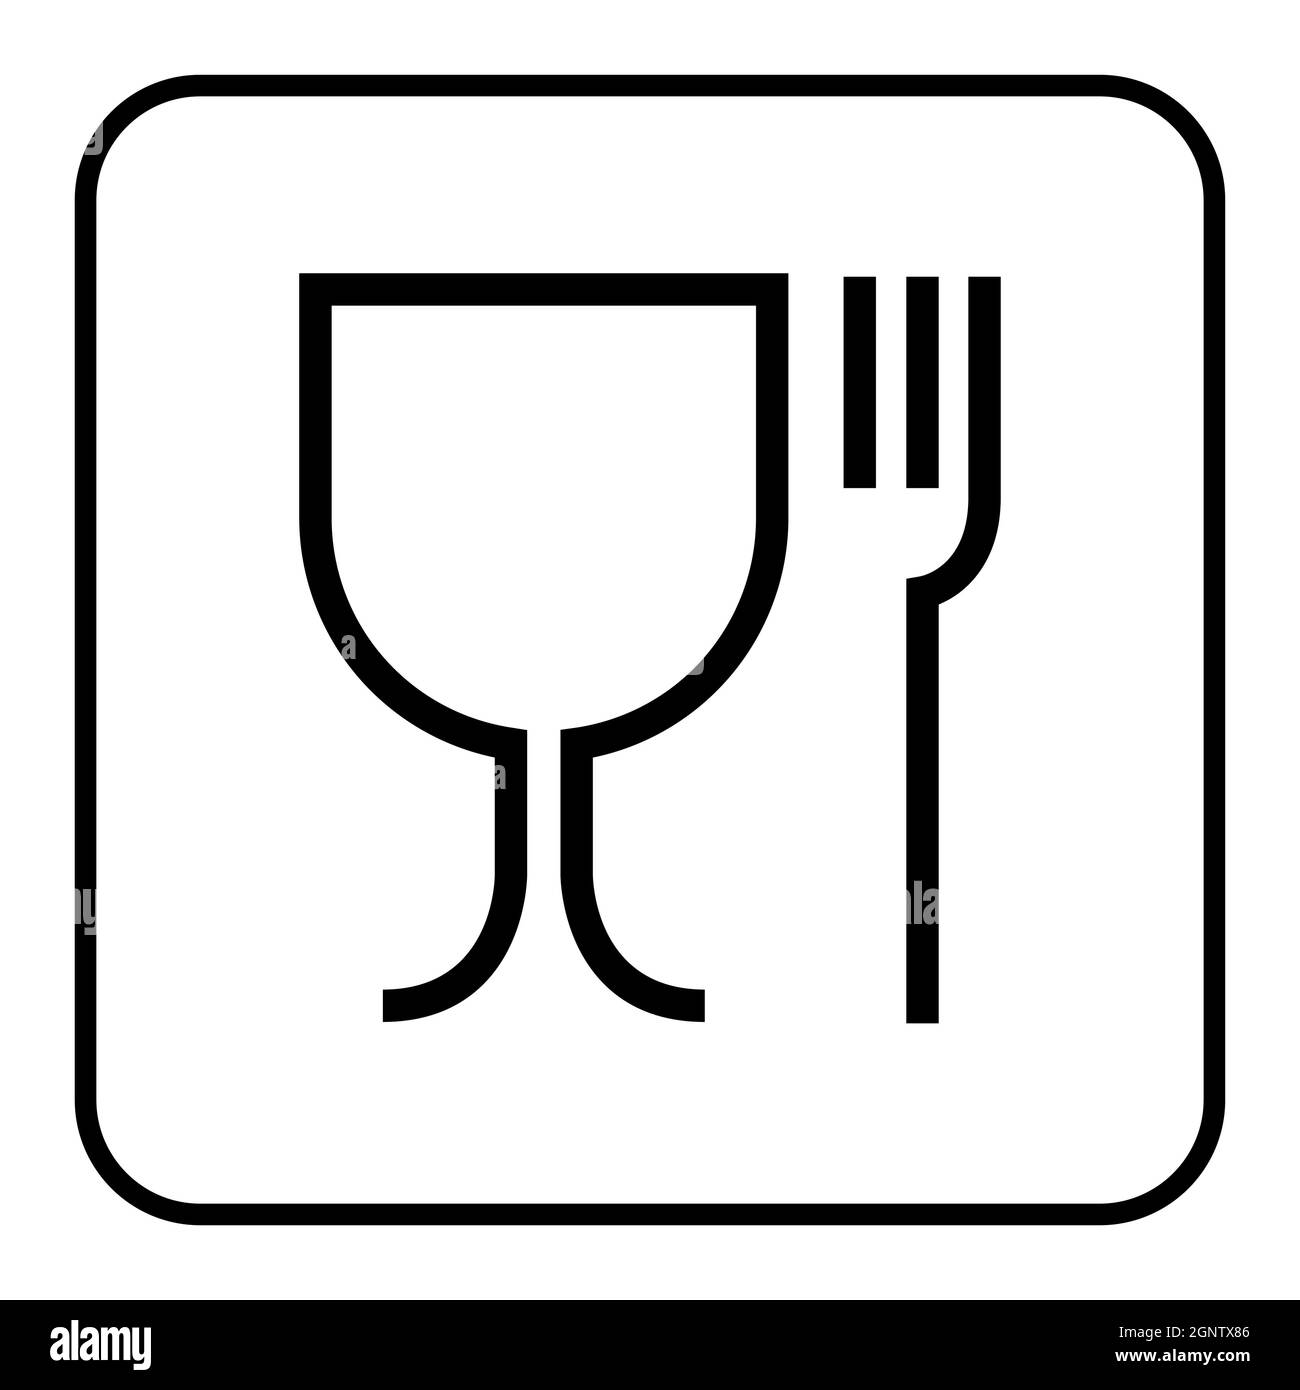 https://c8.alamy.com/comp/2GNTX86/food-grade-icon-pictogram-plastic-contact-fork-and-glass-symbol-food-grade-hygiene-packaging-sign-2GNTX86.jpg